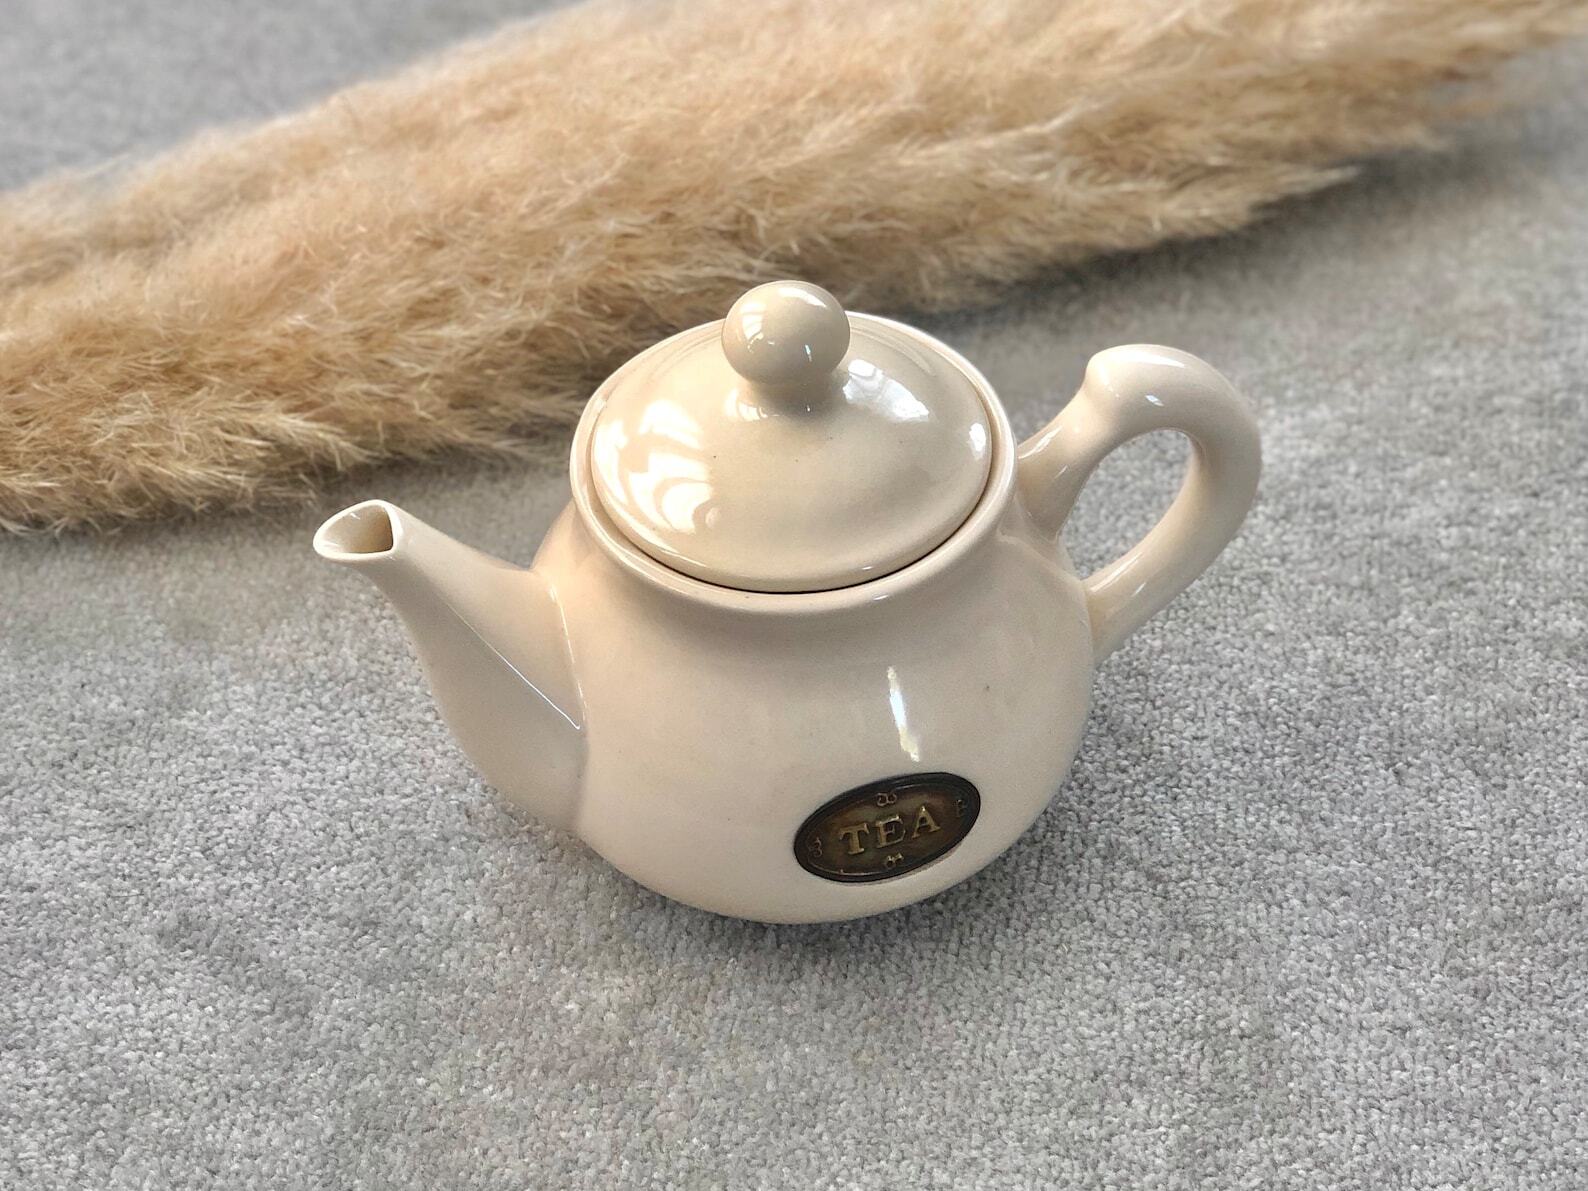 Country Kitchen Ceramic Teapot - Vintage Style Rustic Cream Teapot - Country Homeware